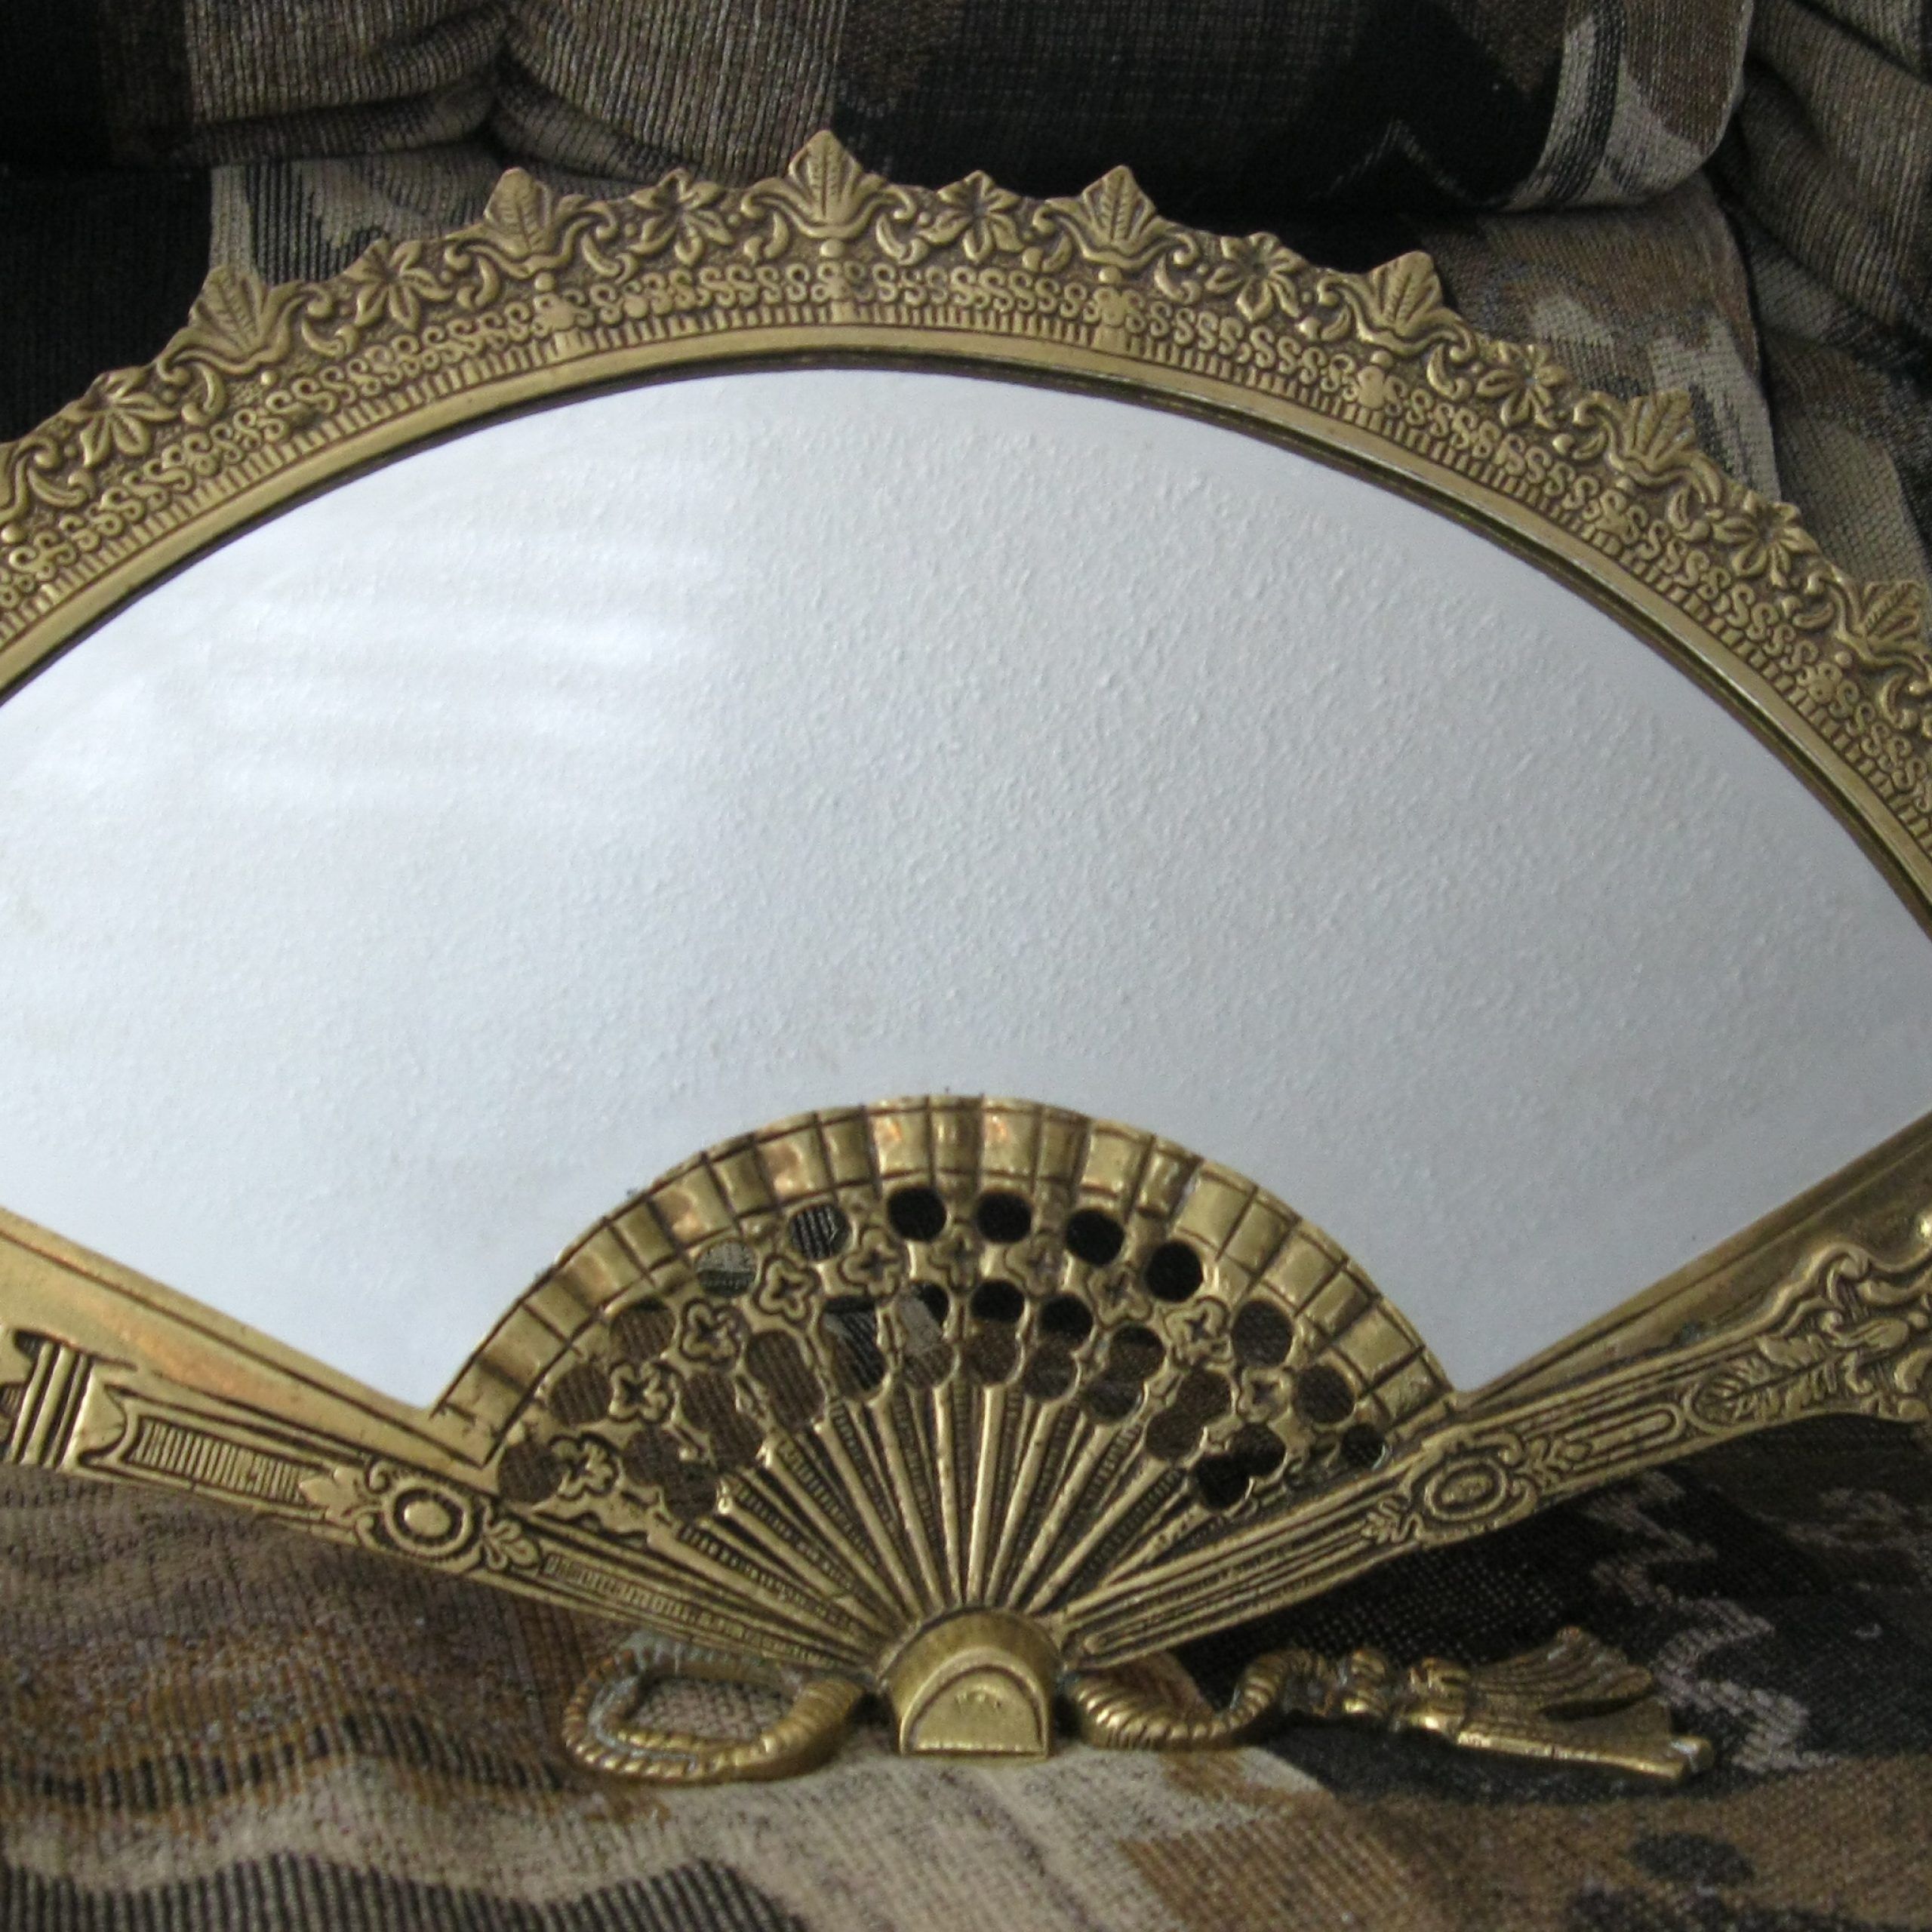 Antique Victorian Solid Brass Fan Mirror Antique Appraisal | Instappraisal Within Antique Brass Standing Mirrors (View 3 of 15)